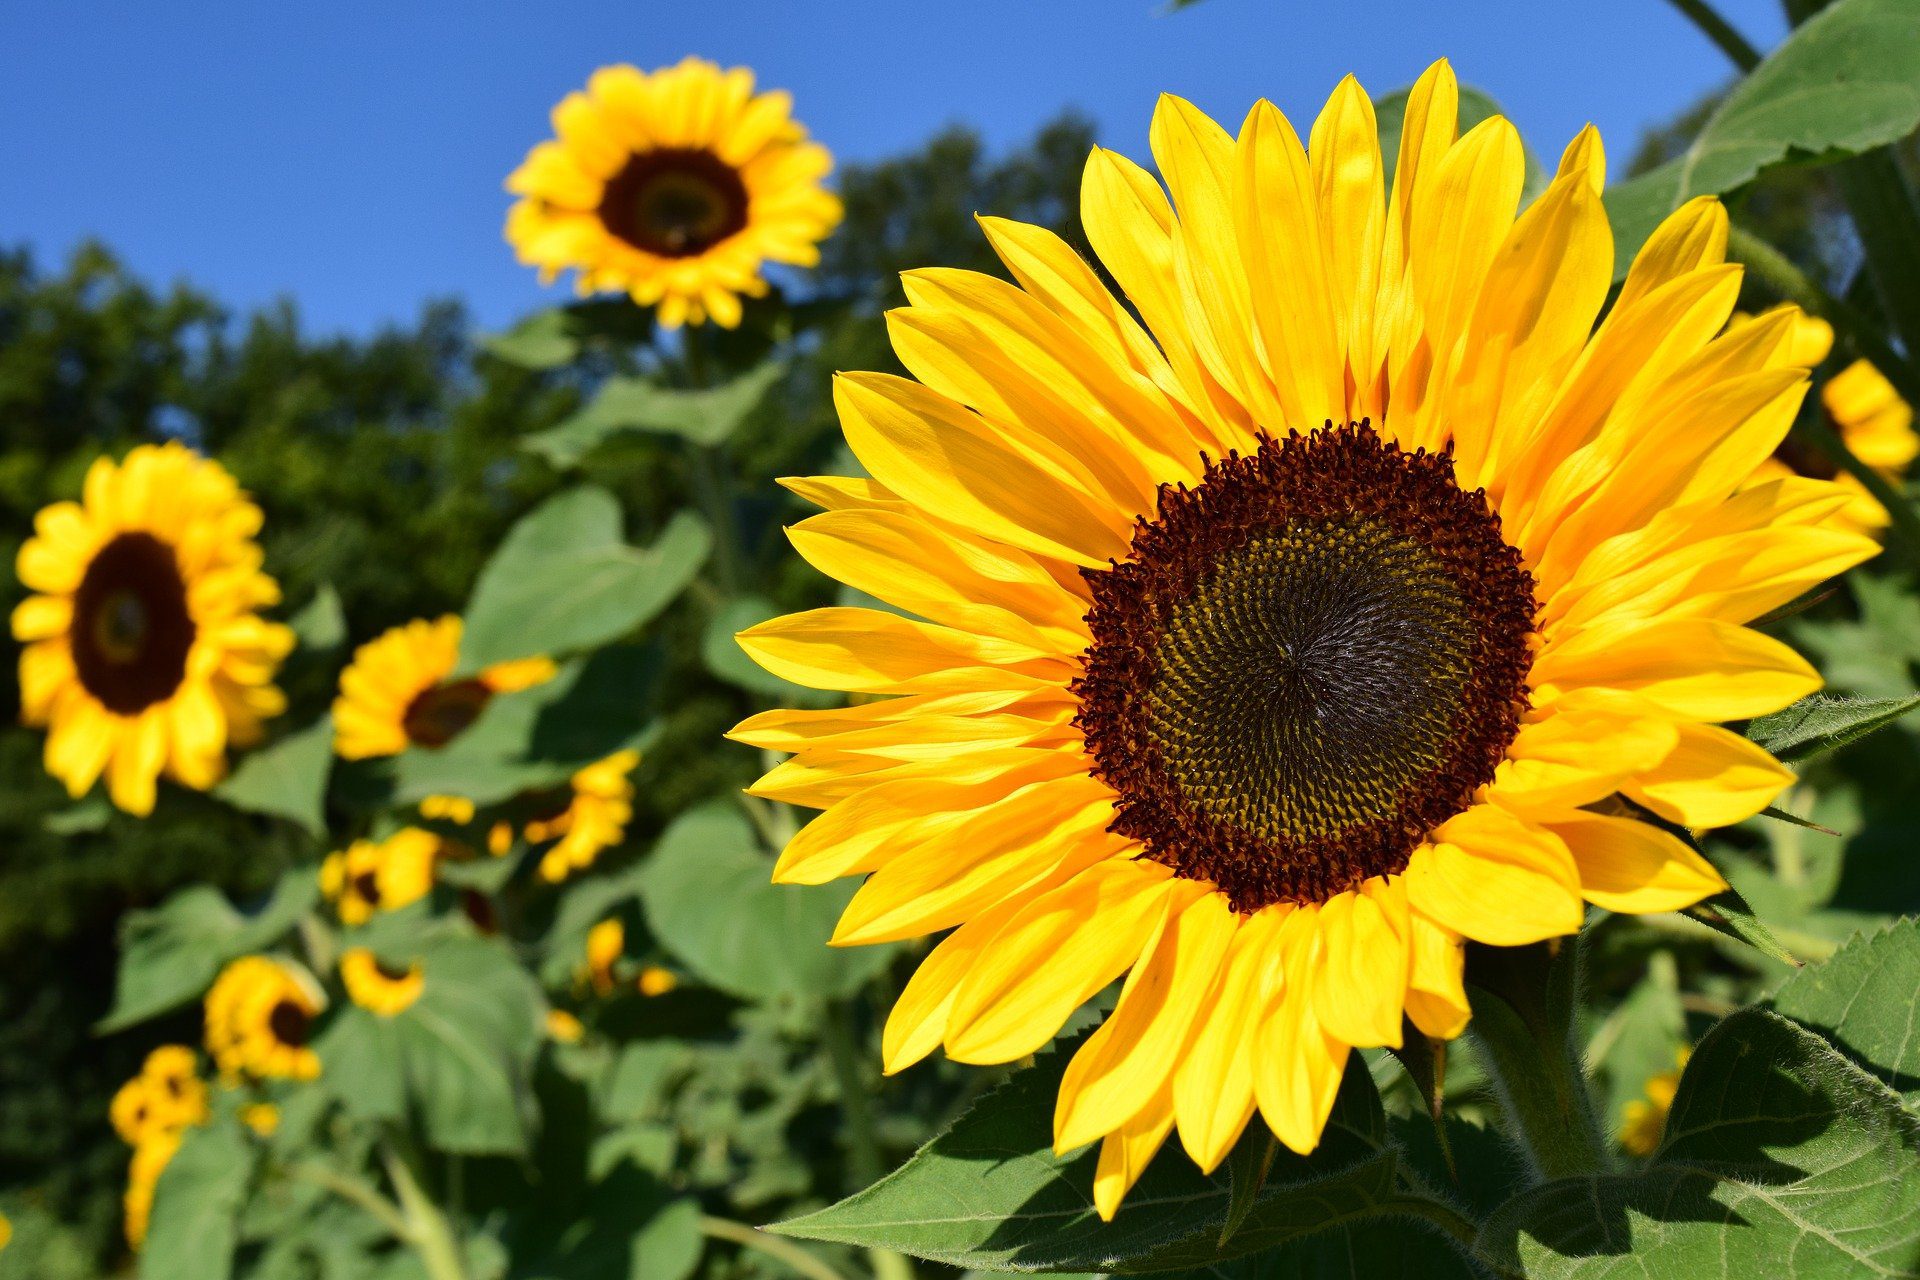 Chicago Reiki Meditation - Prayers of Peace for Ukraine and the World - Sunflowers in the field